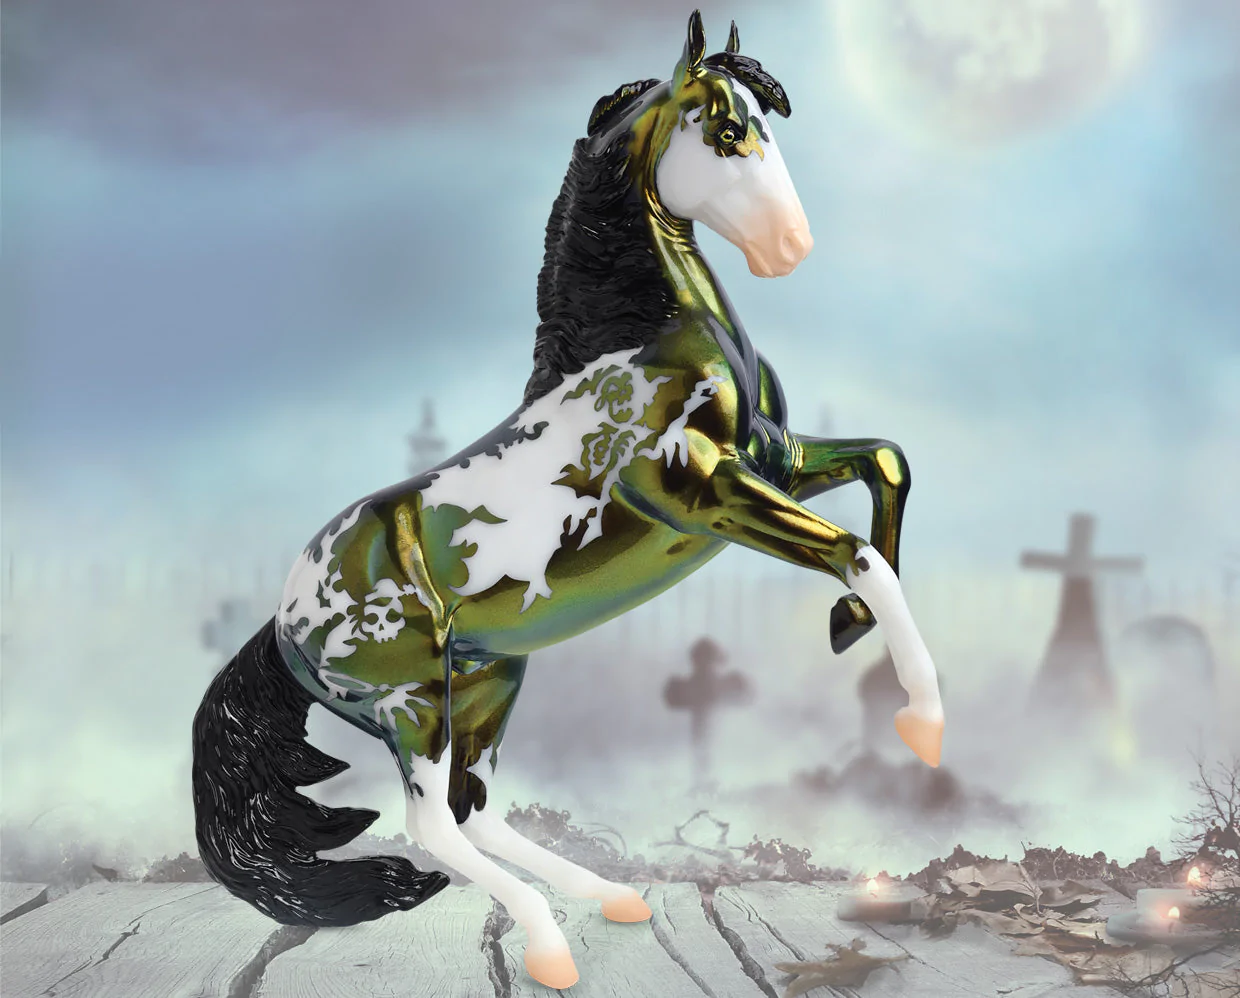 A white horse with green and gold details